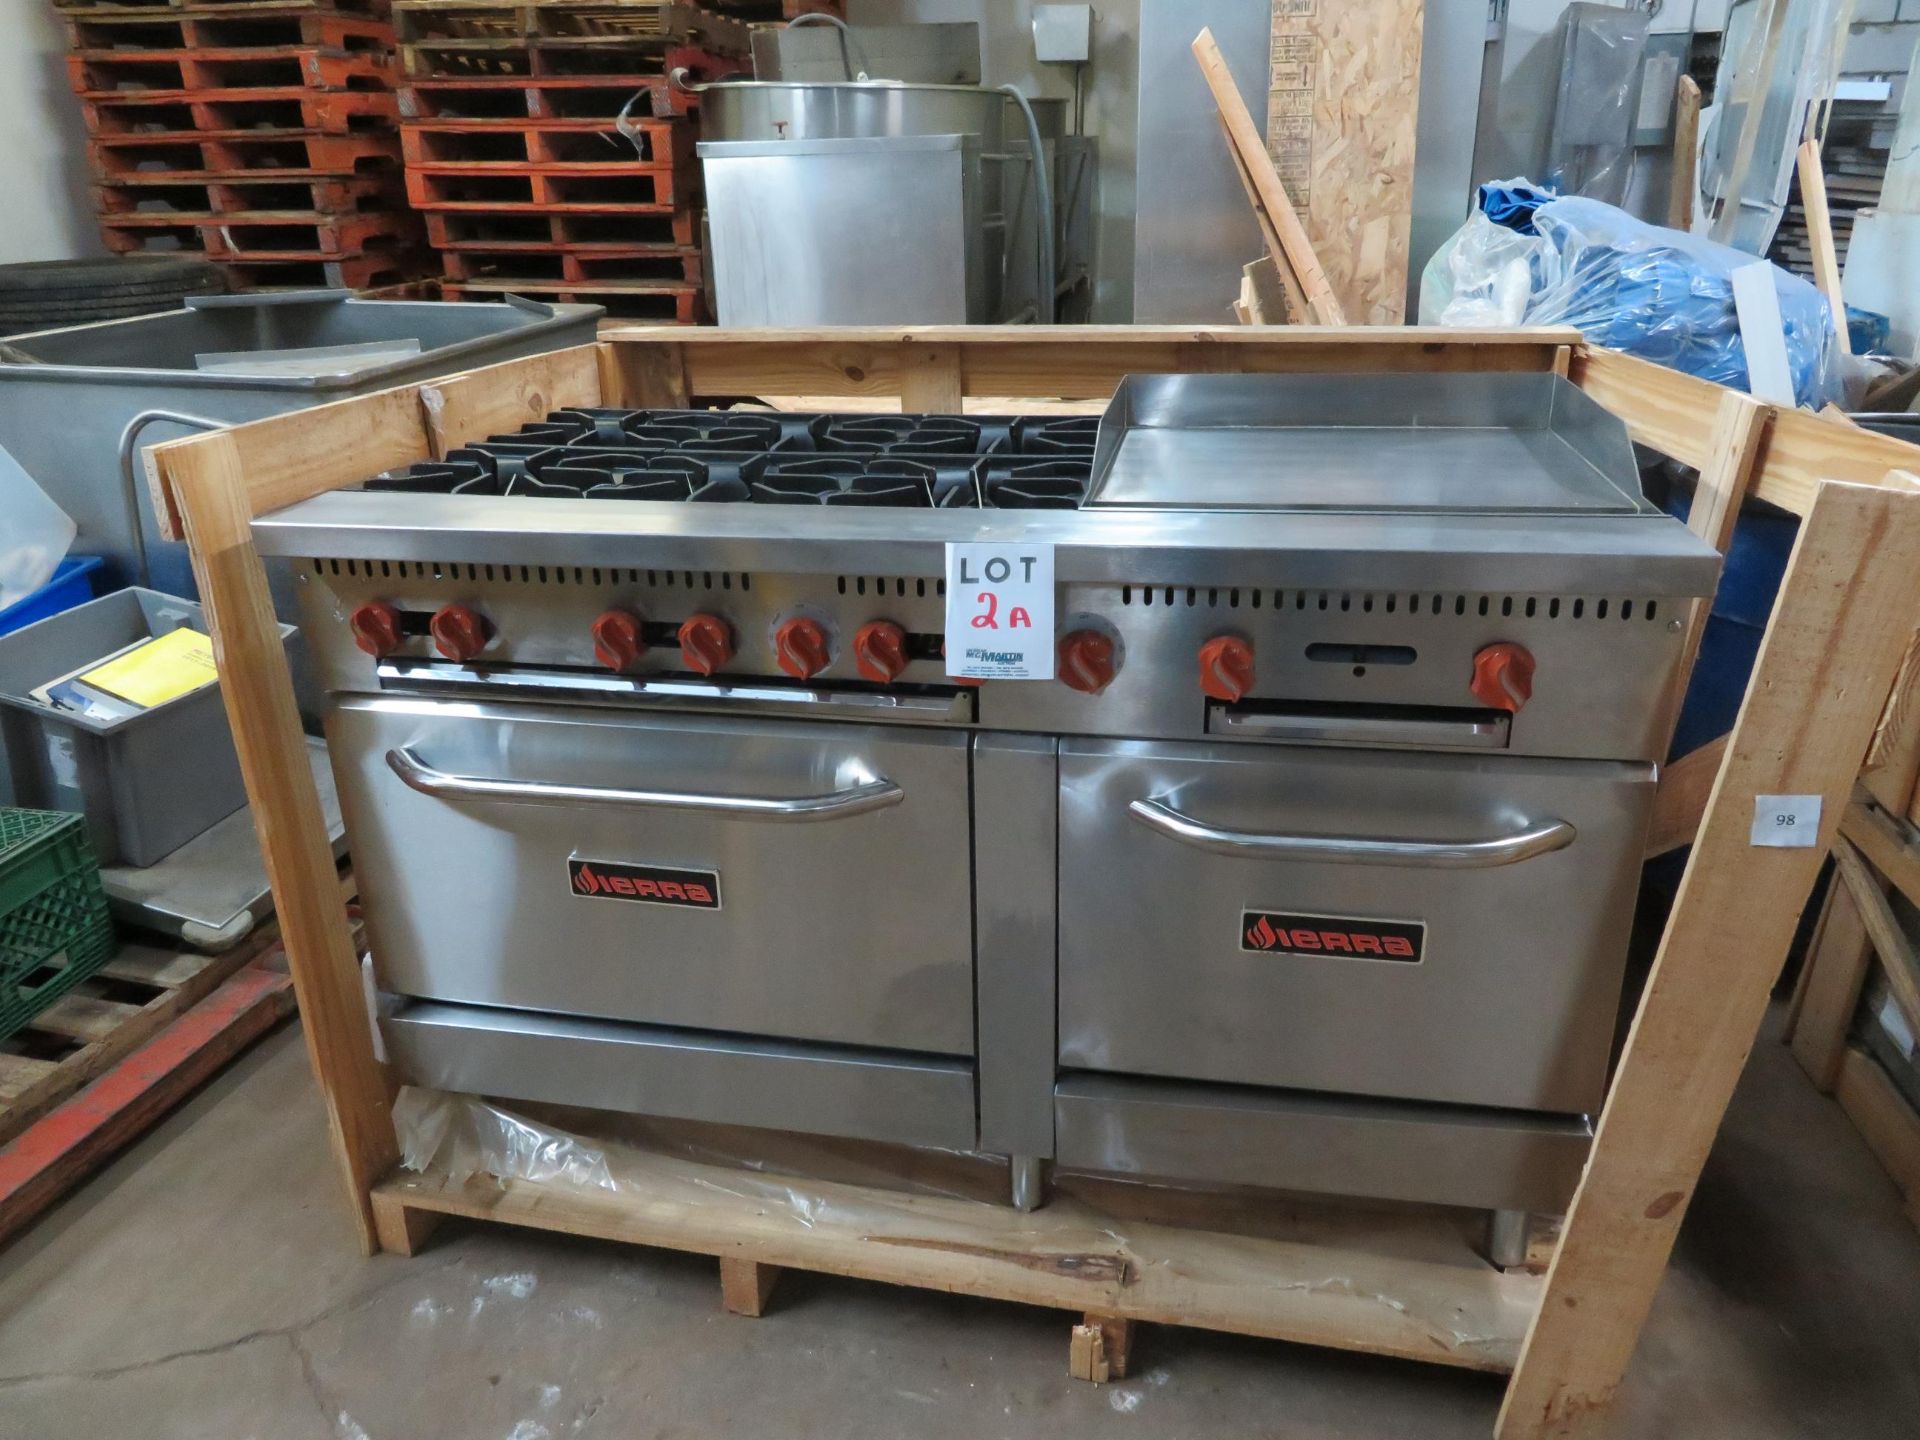 Brand New SIERRA combination gas 60"range with 6 burners and 24" hot plate/griddle, Mod #SR-6B-24G-